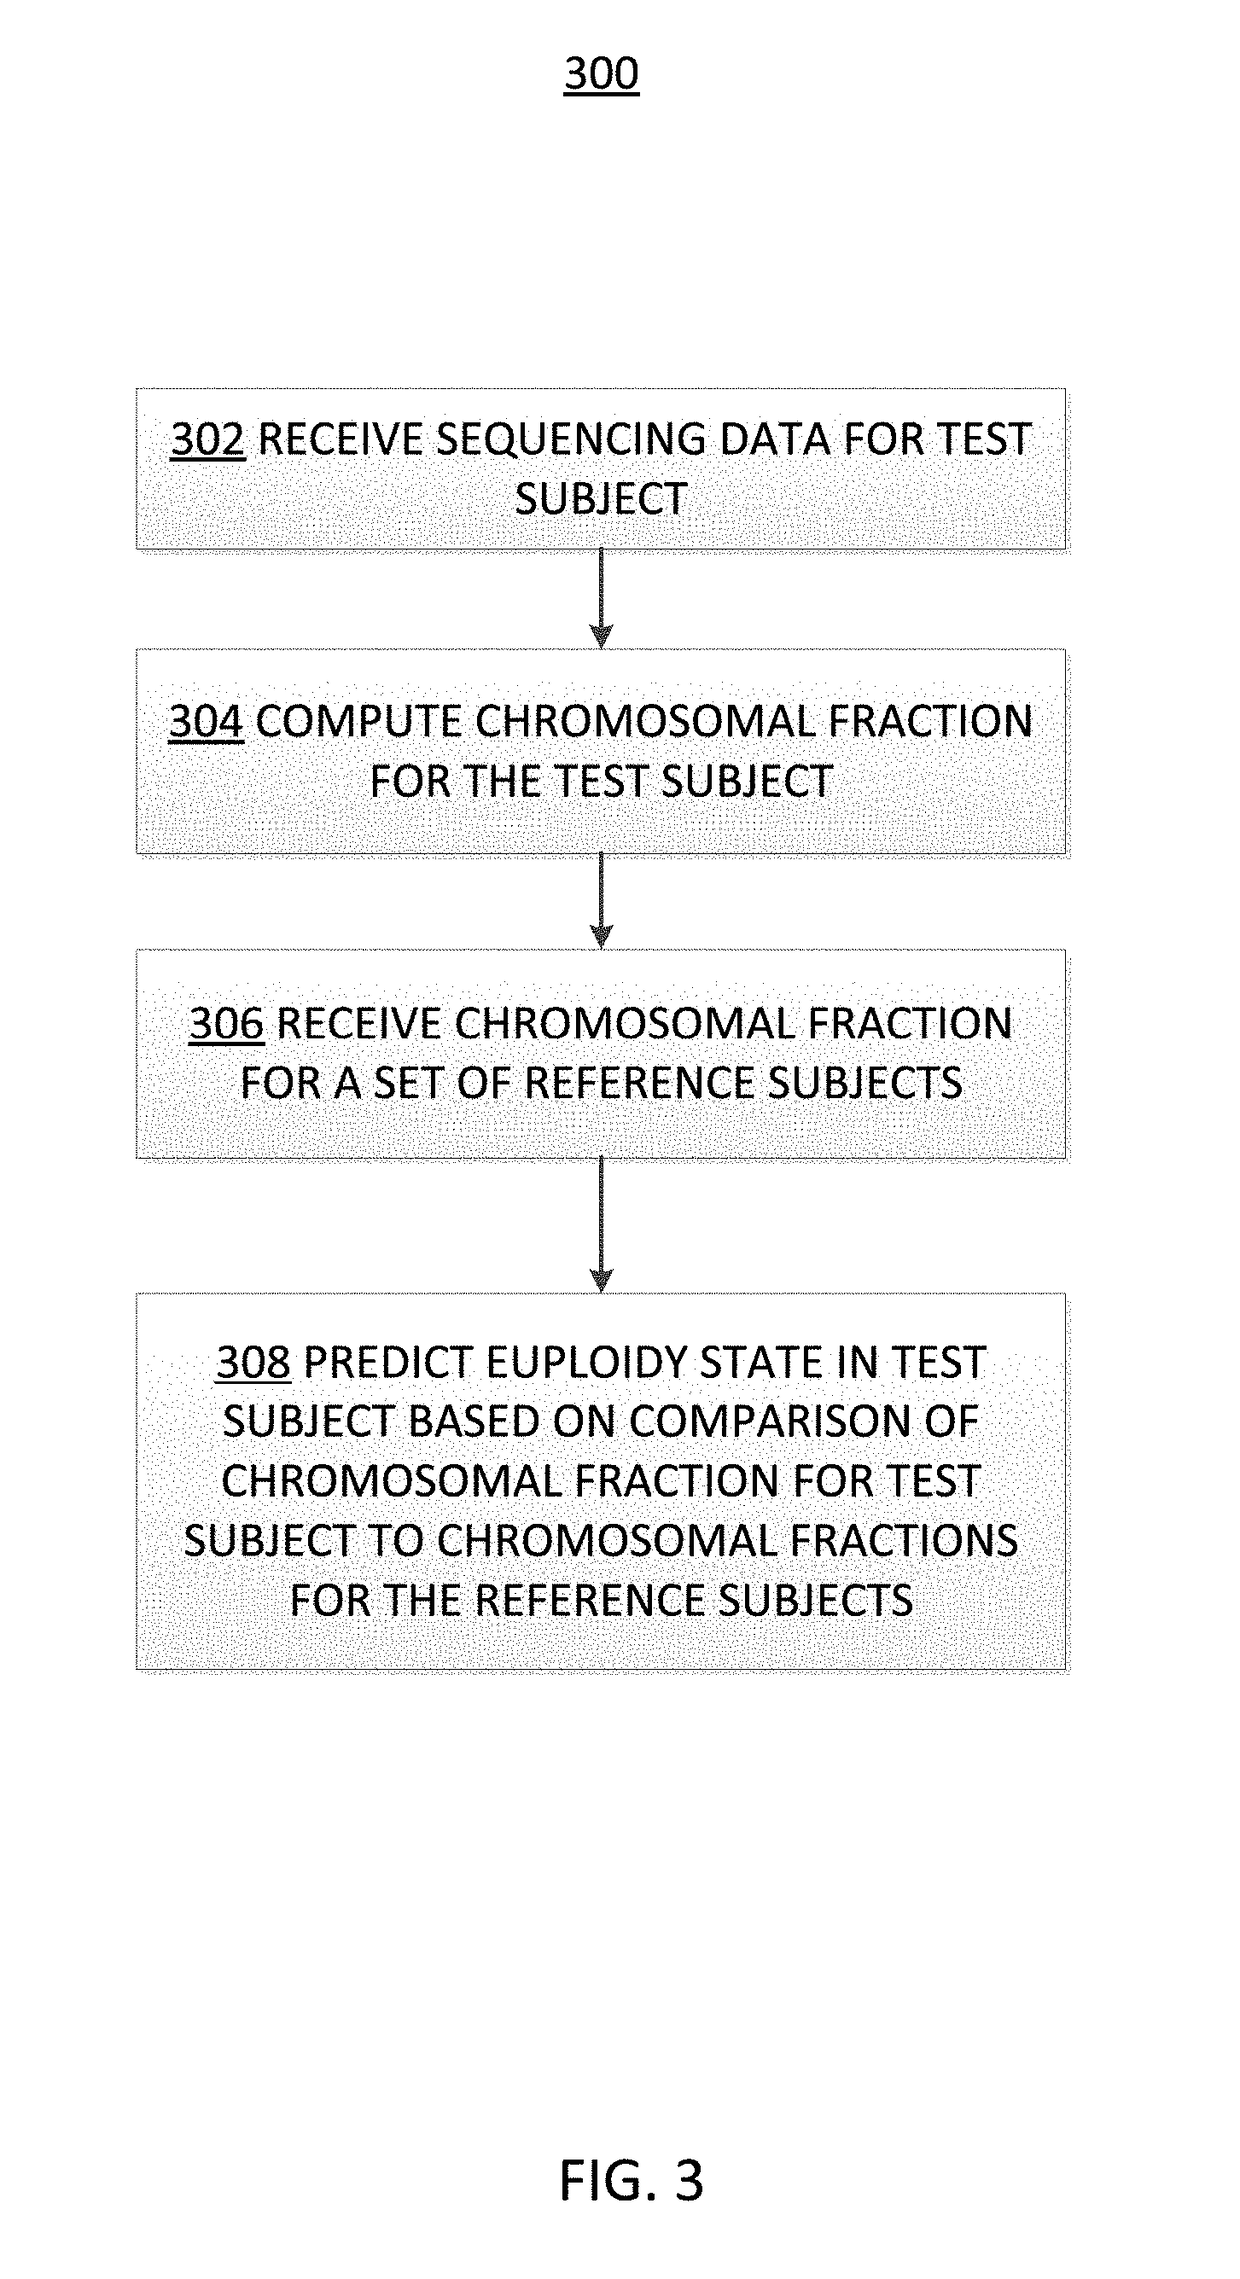 Nucleic acids and methods for detecting chromosomal abnormalities